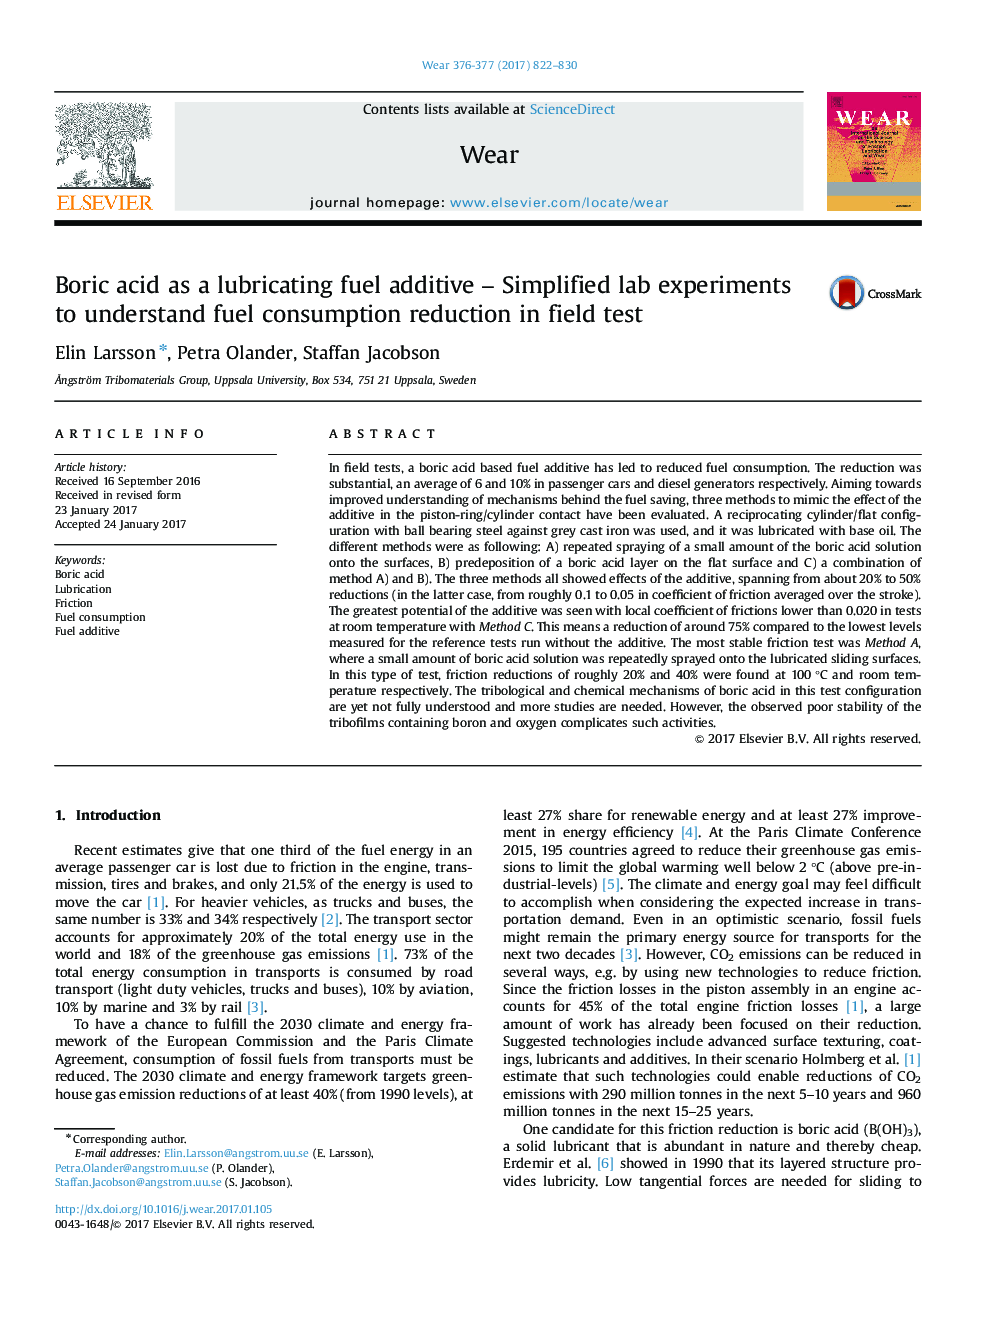 Boric acid as a lubricating fuel additive - Simplified lab experiments to understand fuel consumption reduction in field test